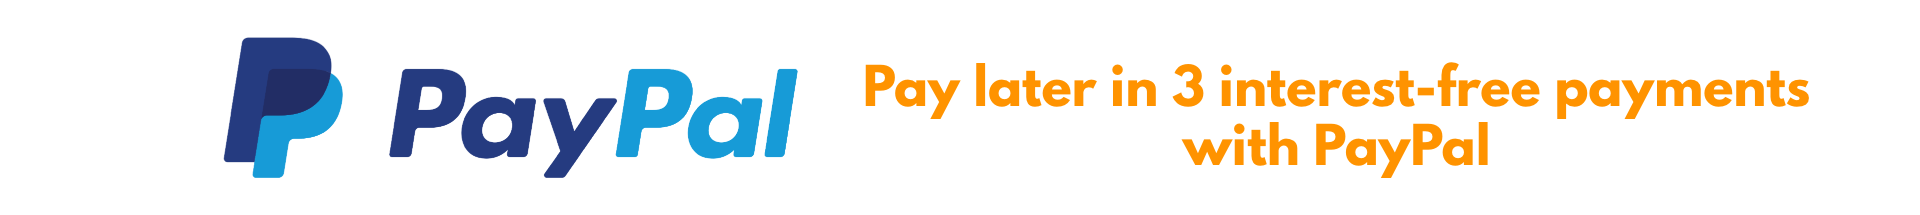 Pay later in 3 interest-free payments with PayPal